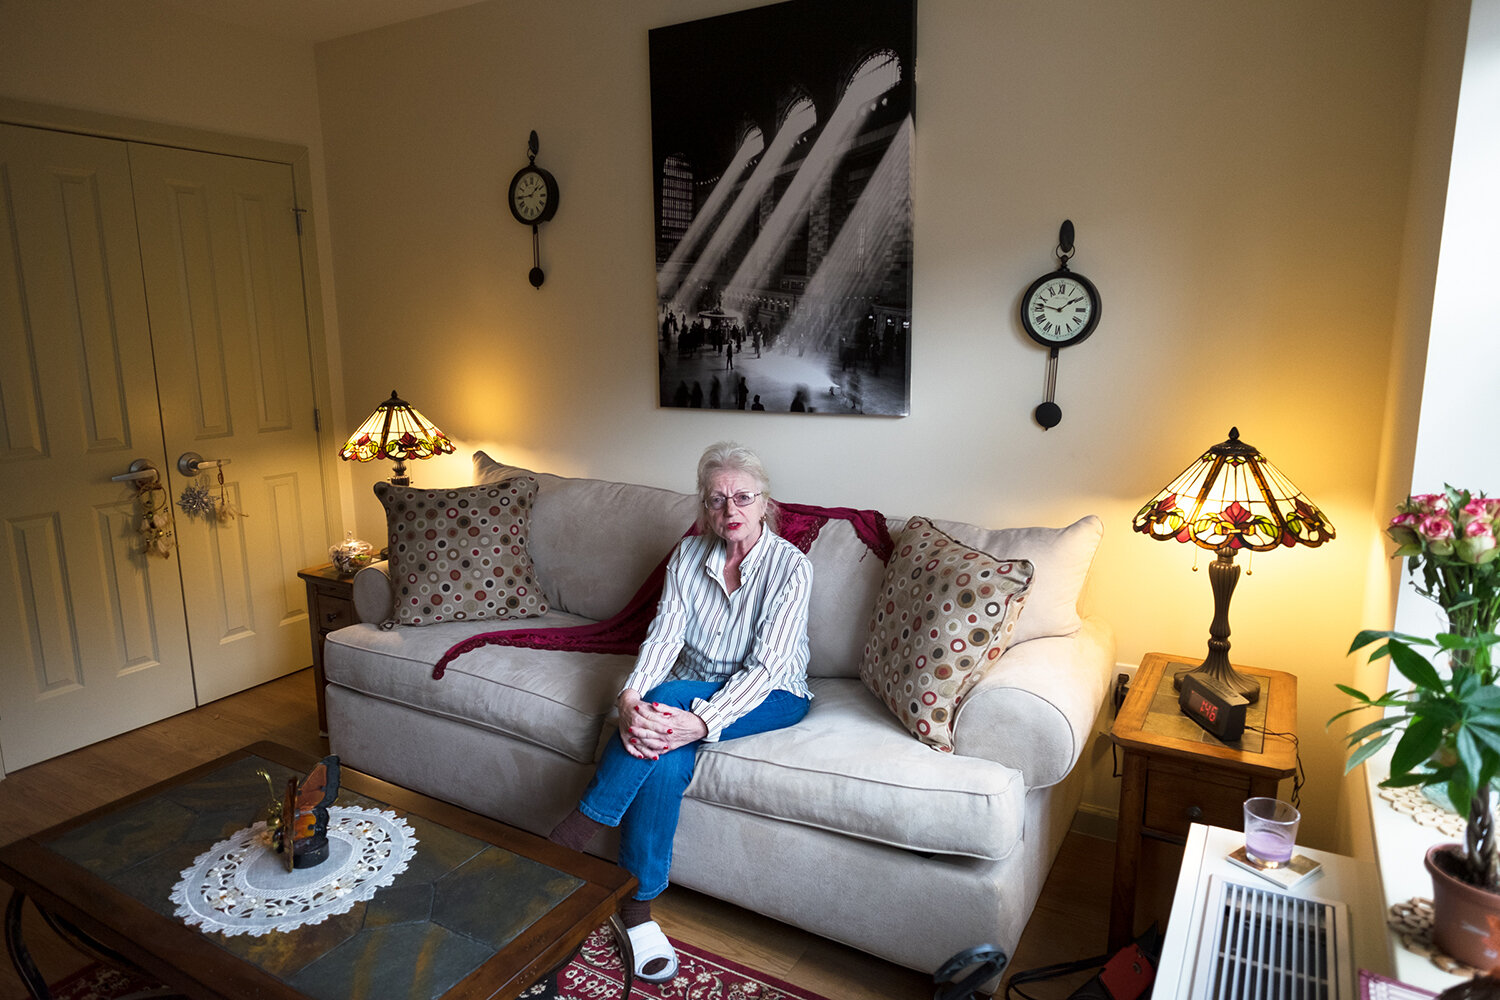  Rosalie, 70, on her couch bed in her studio apartment five months after her release. Image © Sara Bennett. 